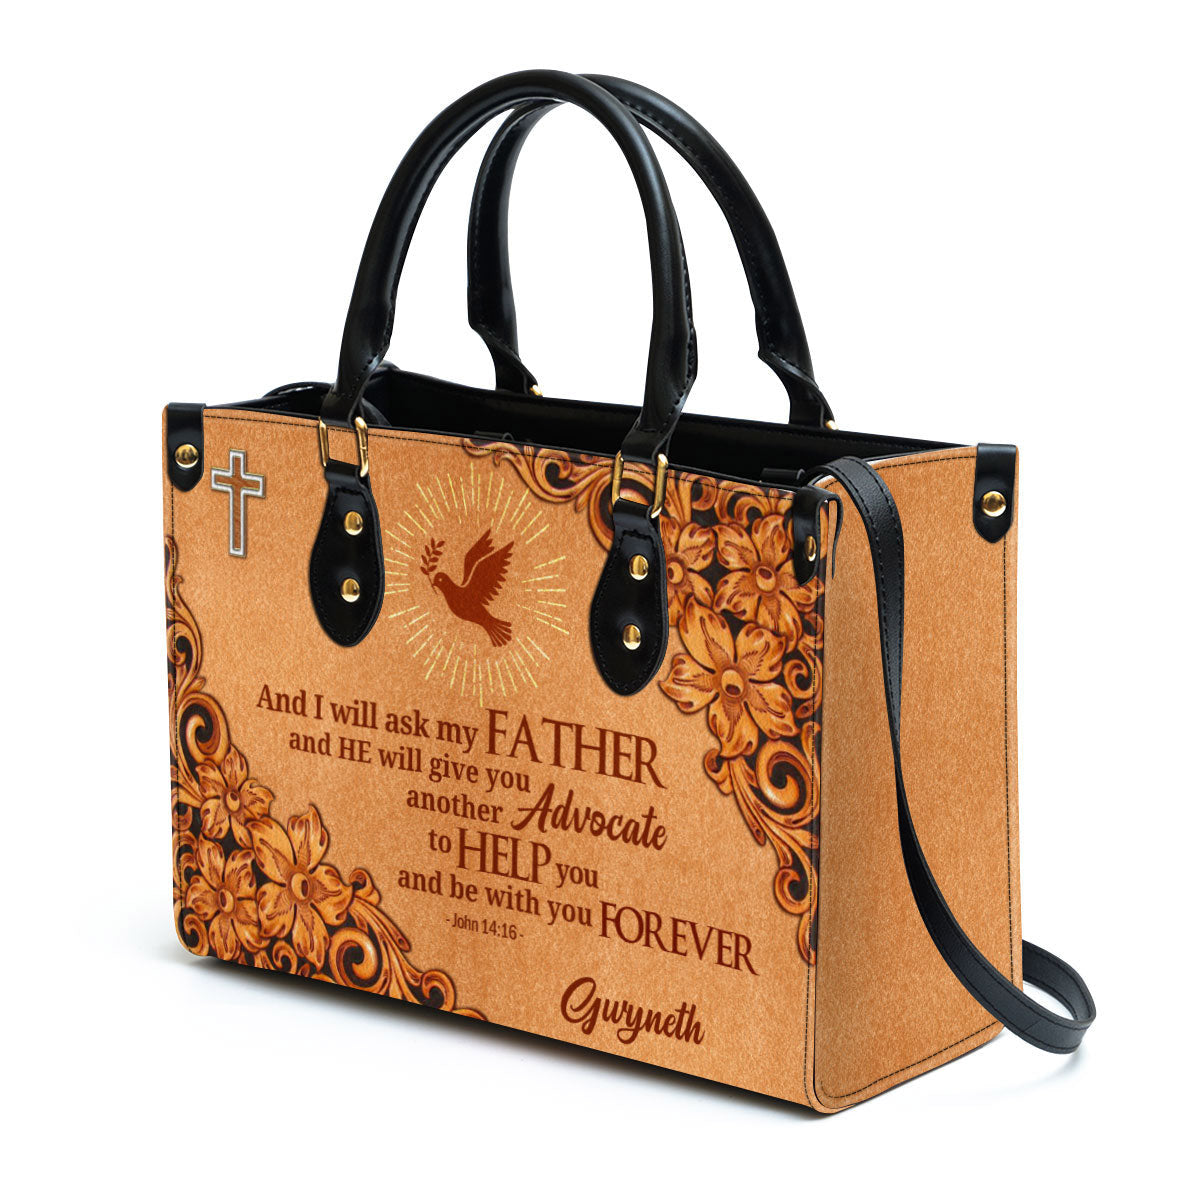 Cross And Pigeon And I Will Ask The Father John 1416 Personalized Zippered Leather Handbag With Handle Christian Gifts For Women